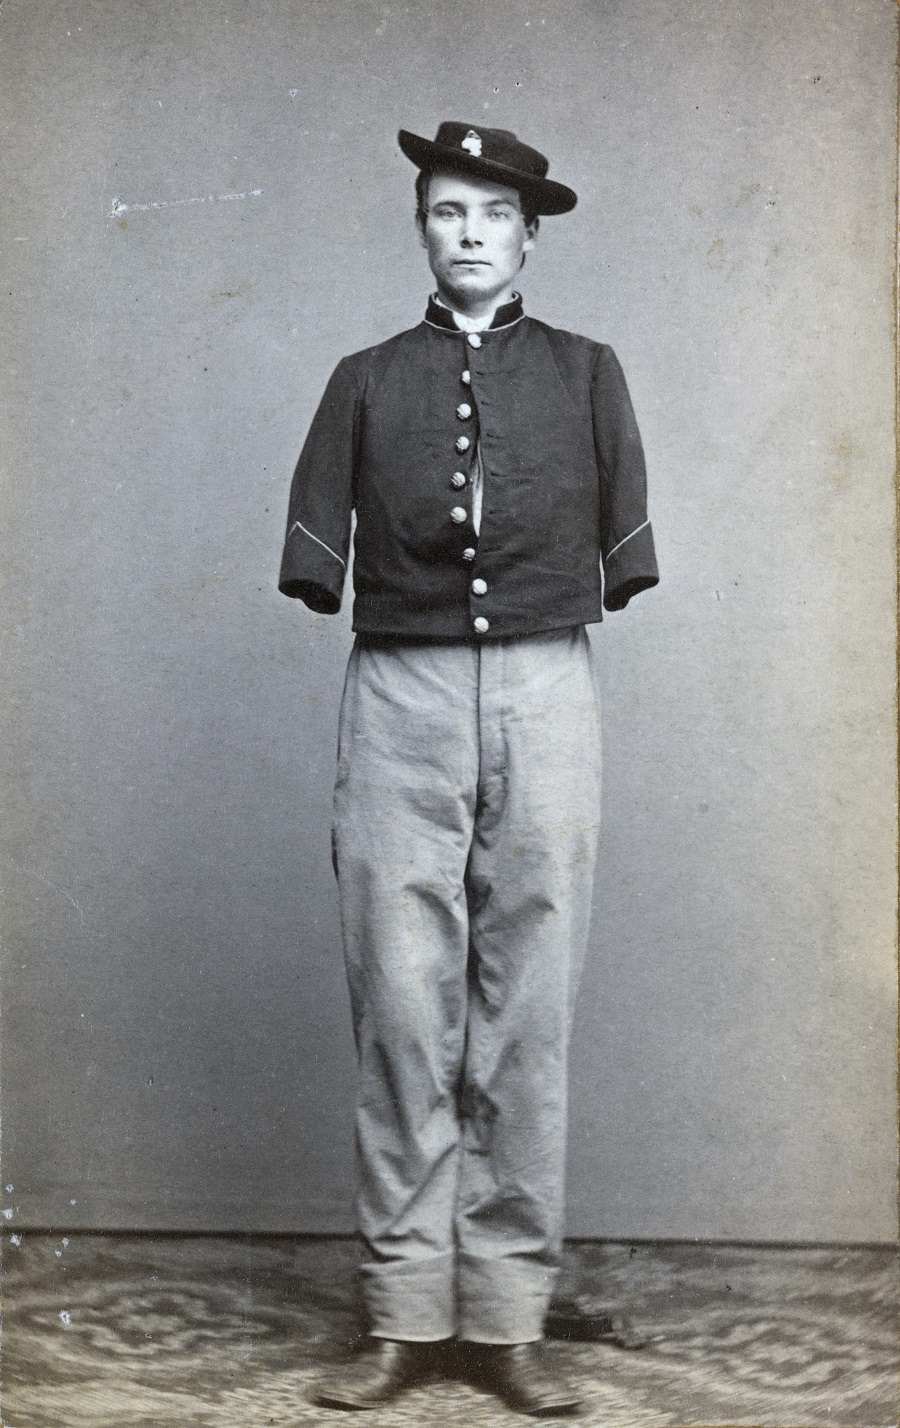 Private William Sergent of Co. E, 53rd Pennsylvania Infantry Regiment, in uniform, after the amputation of both arms. 1861.